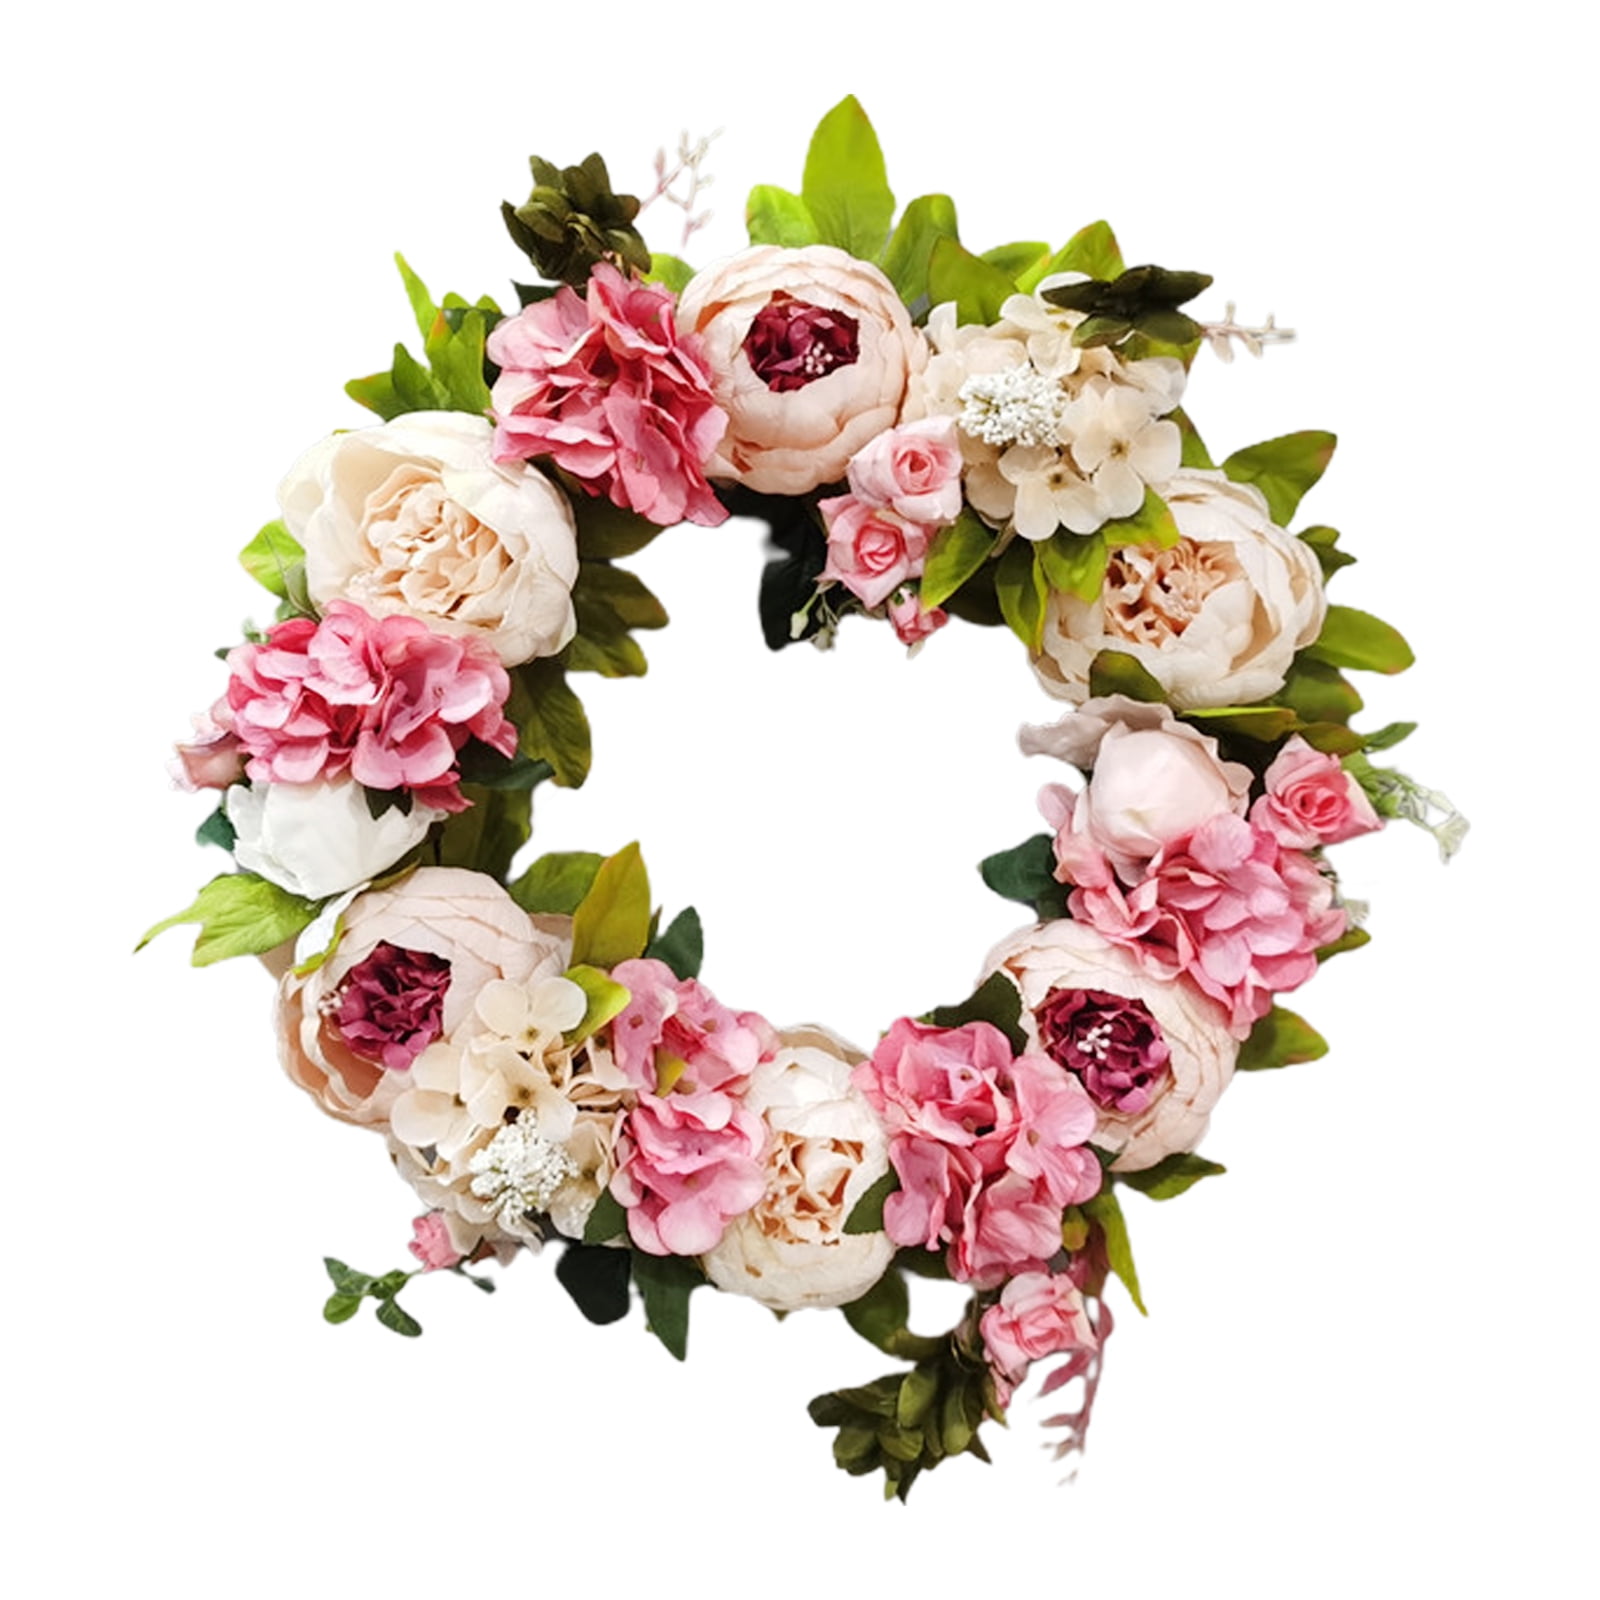 Mother’s Day Gift Hydrangea and Peony Wreath Pink Peony Wreath Farmhouse Wreaths for Front Door Spring and Summer Wreath Easter Wreath